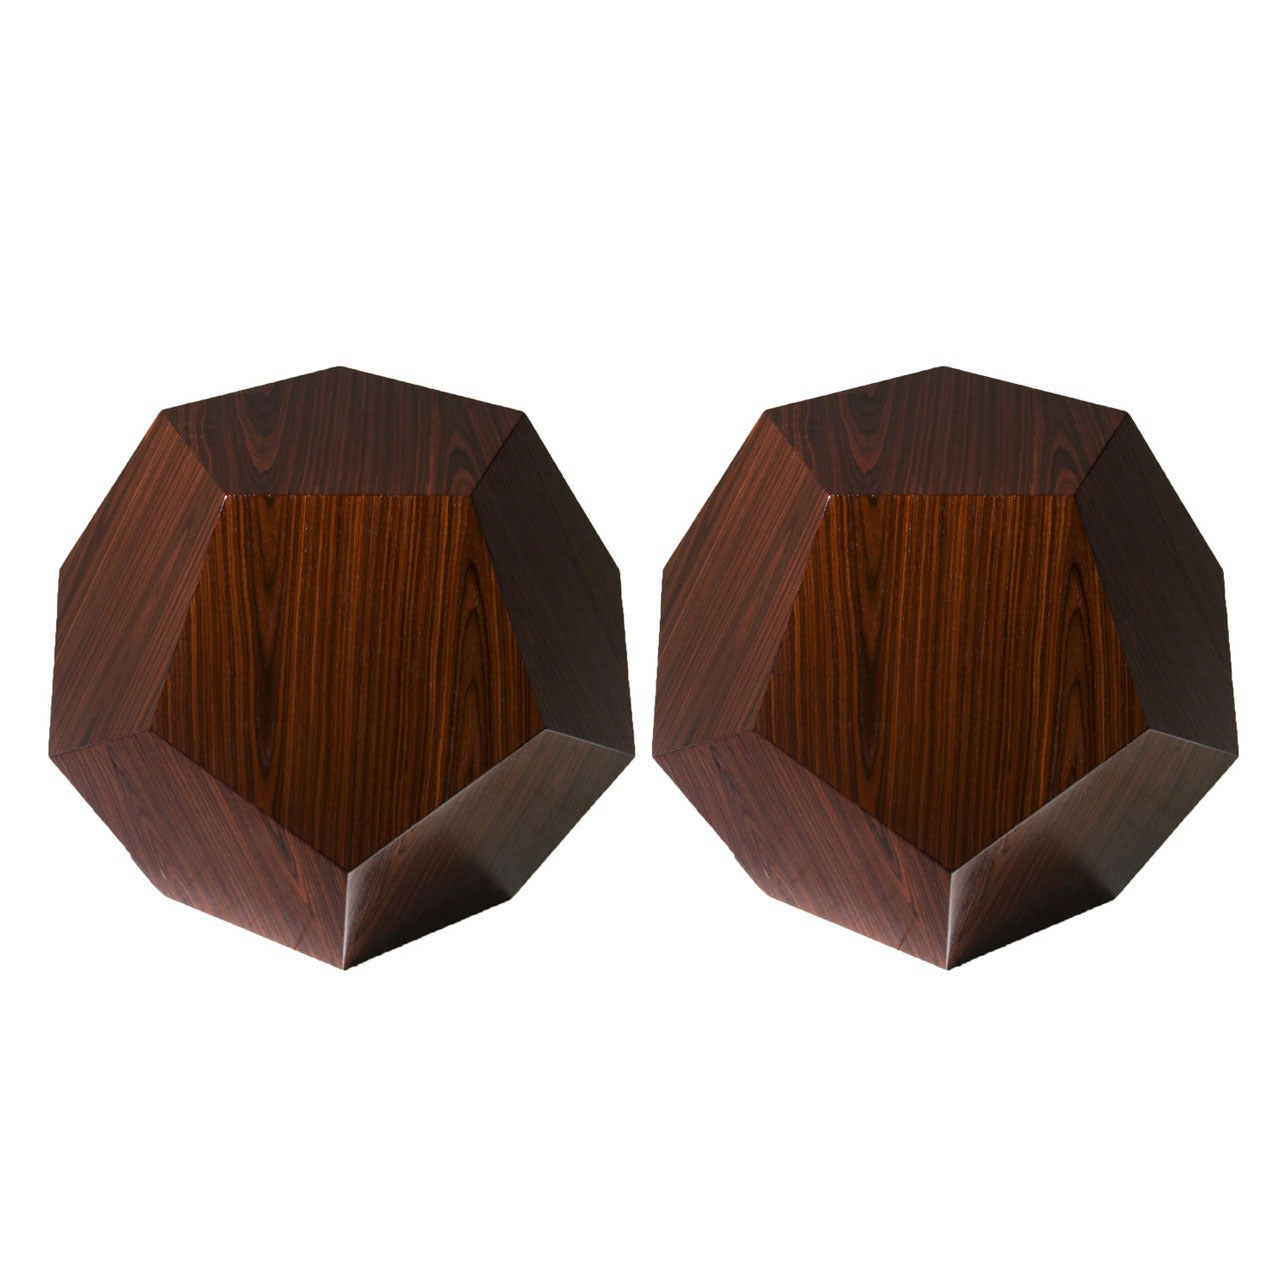 The Dodecahedron Side Table in Rosewood by Thomas Hayes Studio